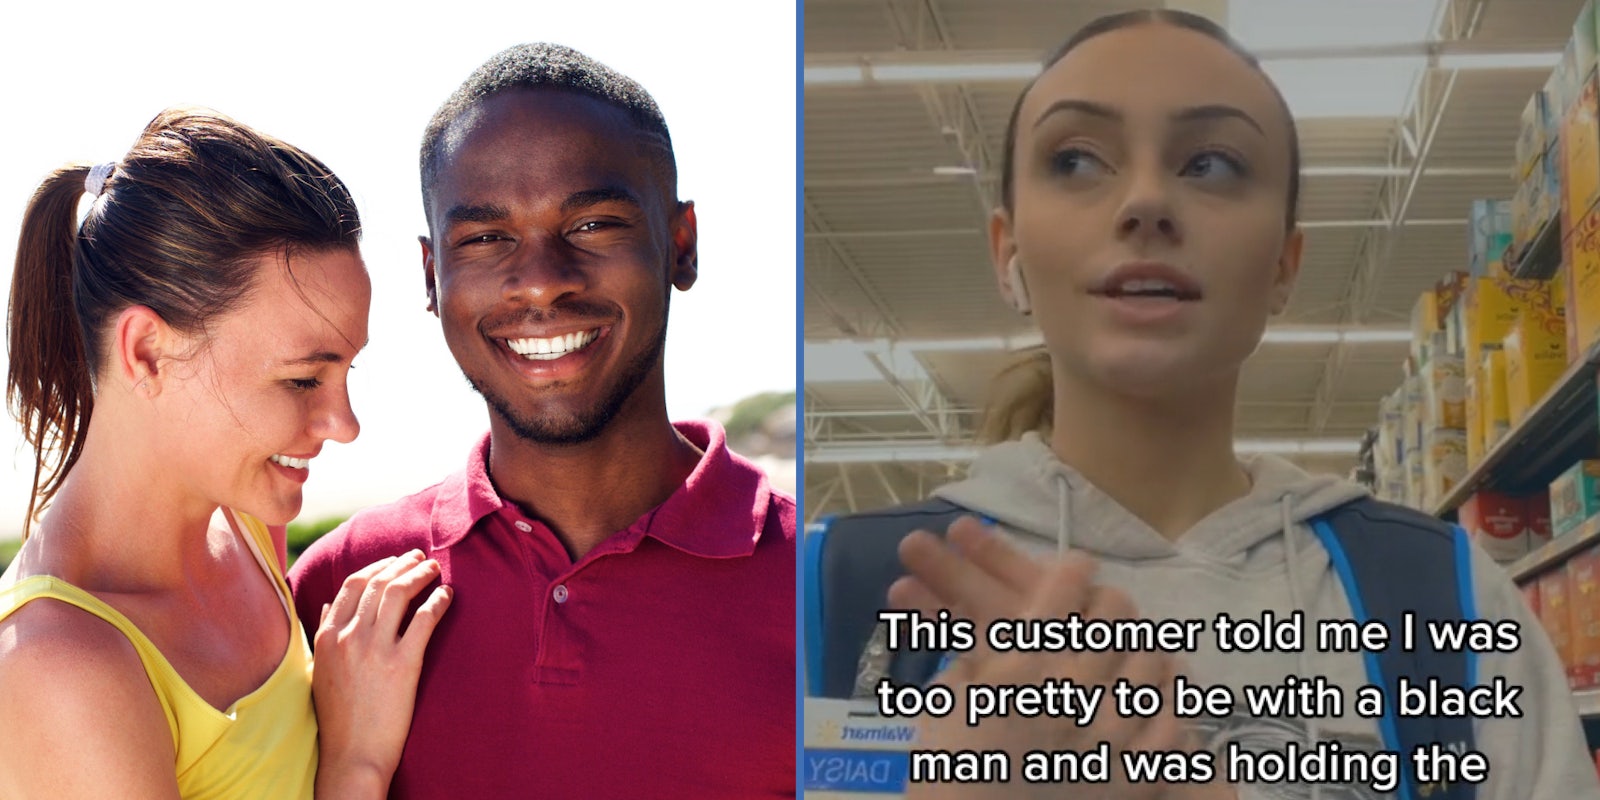 happy couple smiling white woman african american man (l) Walmart employee talking rubbing hands scared caption 'This customer told me I was too pretty to be with a black man and was holding the' (r)